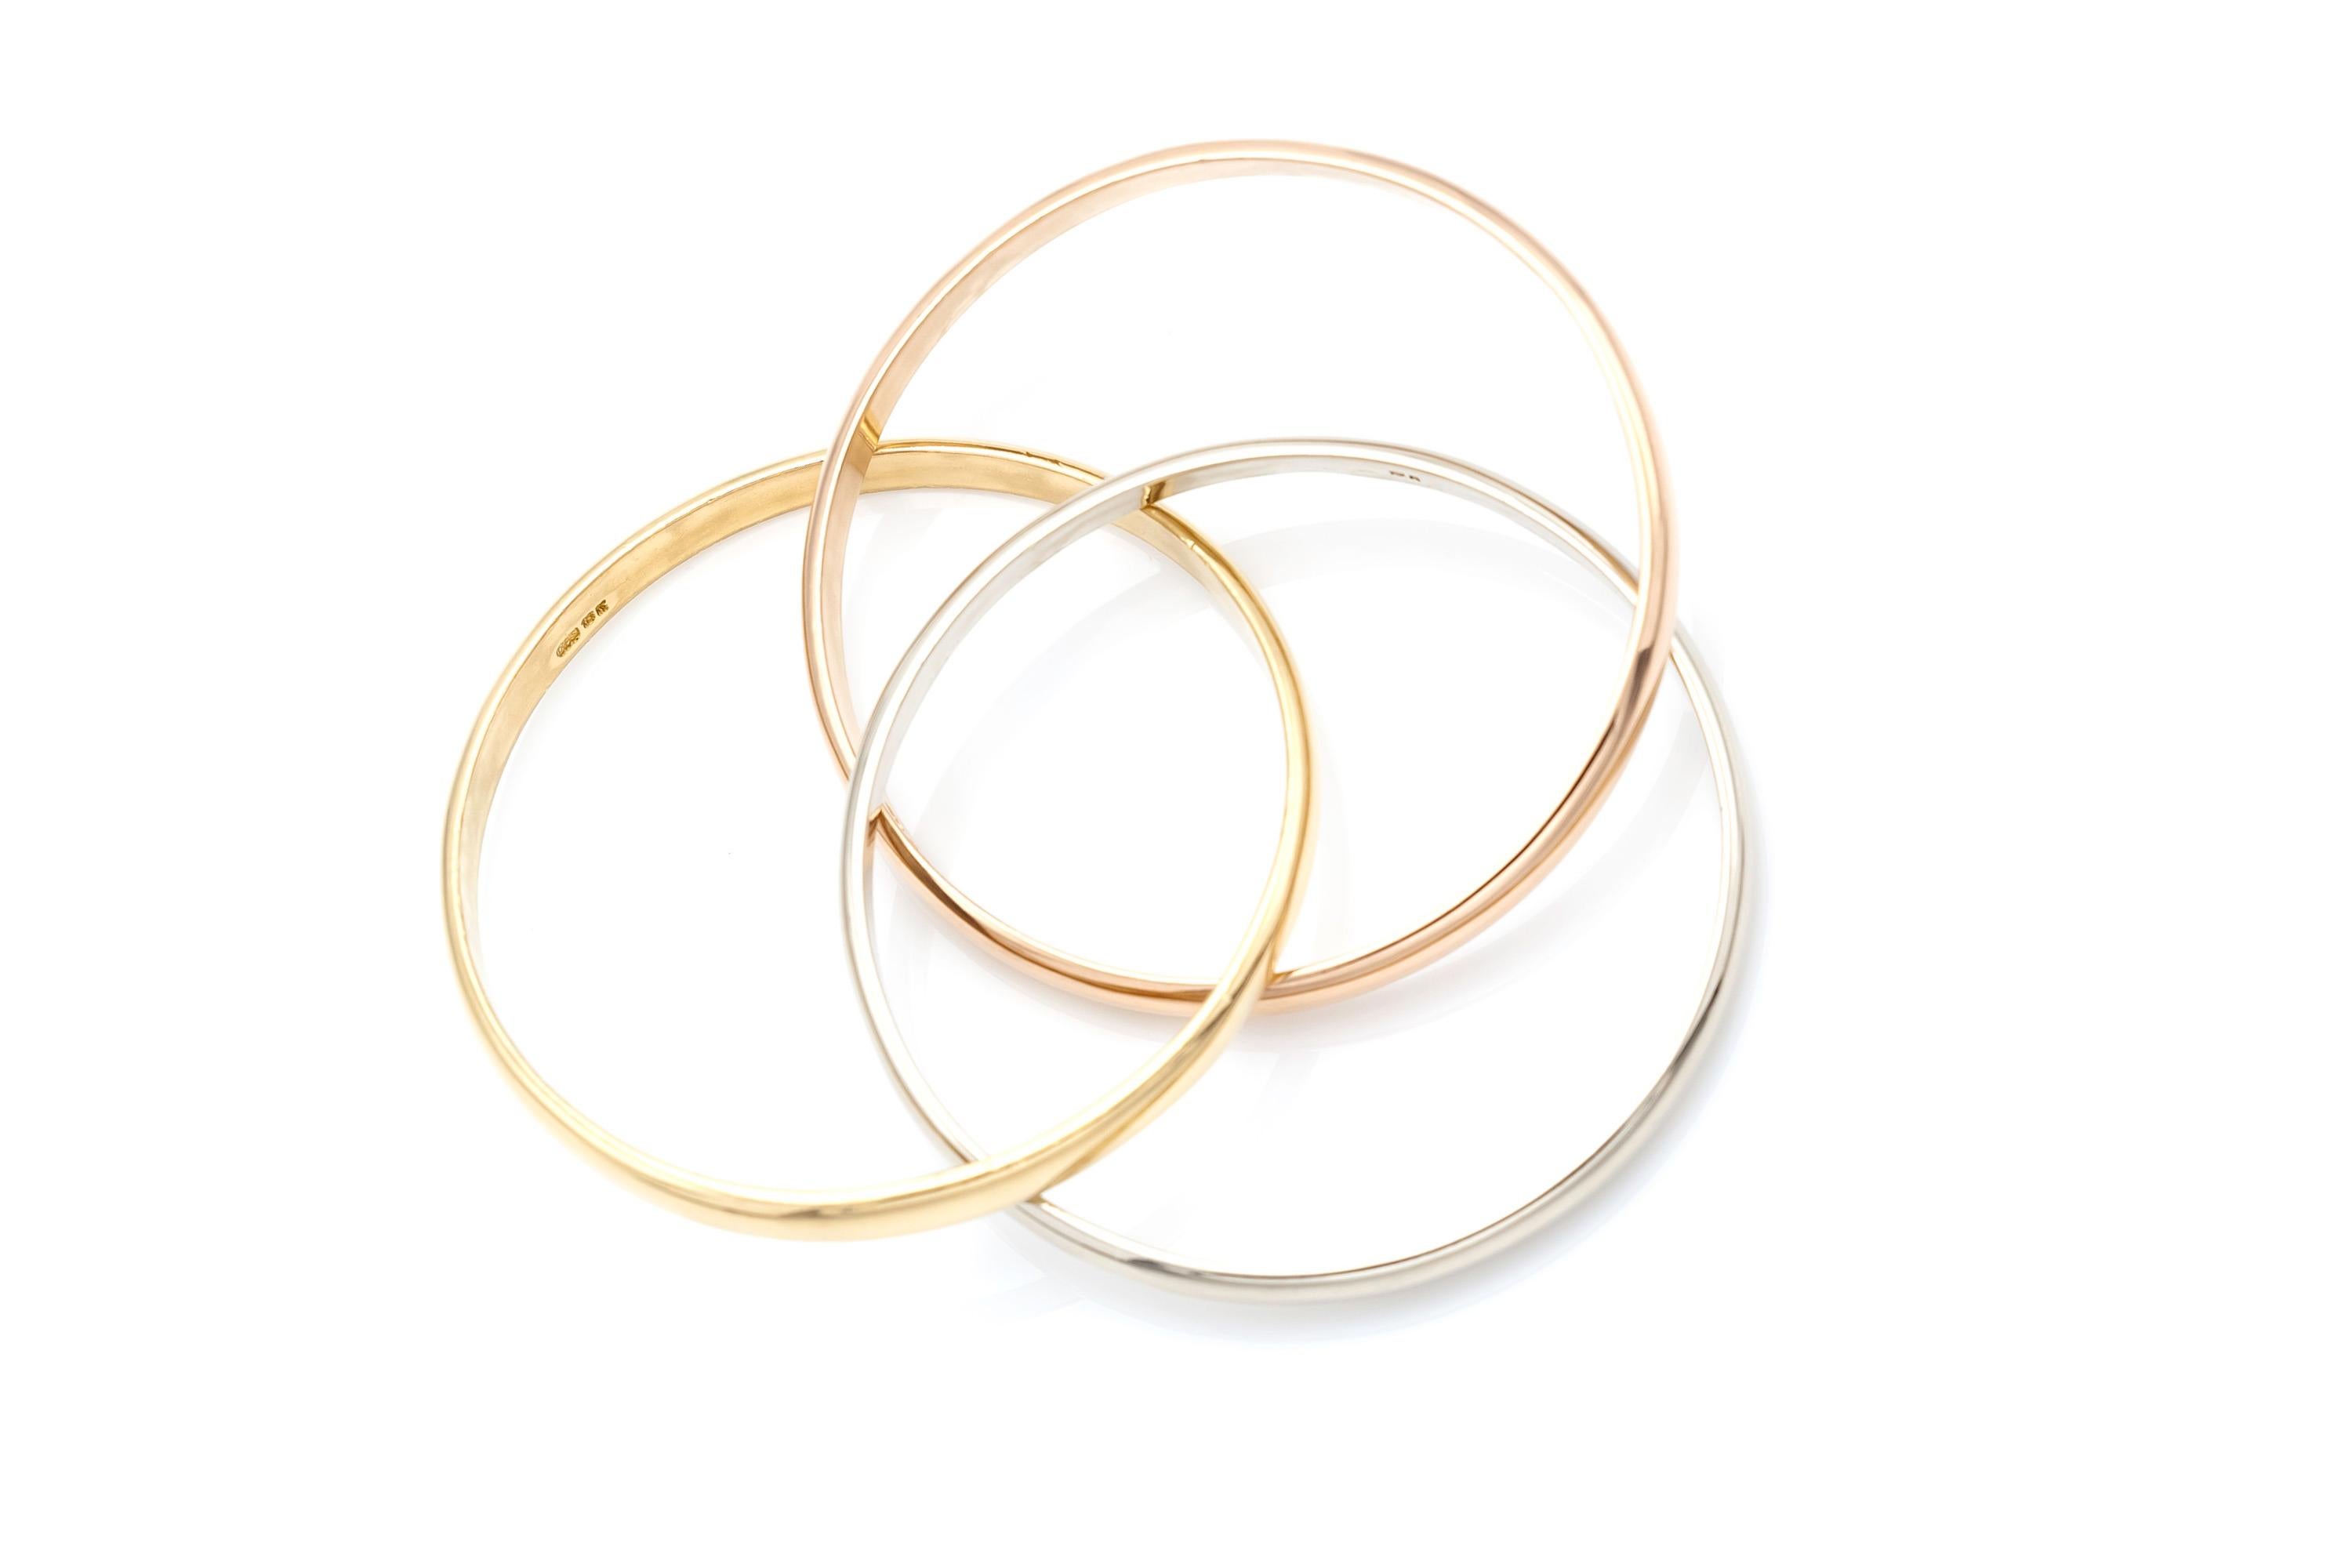 Three interconnected bangles finely crafted in 18K yellow, white, and rose gold.